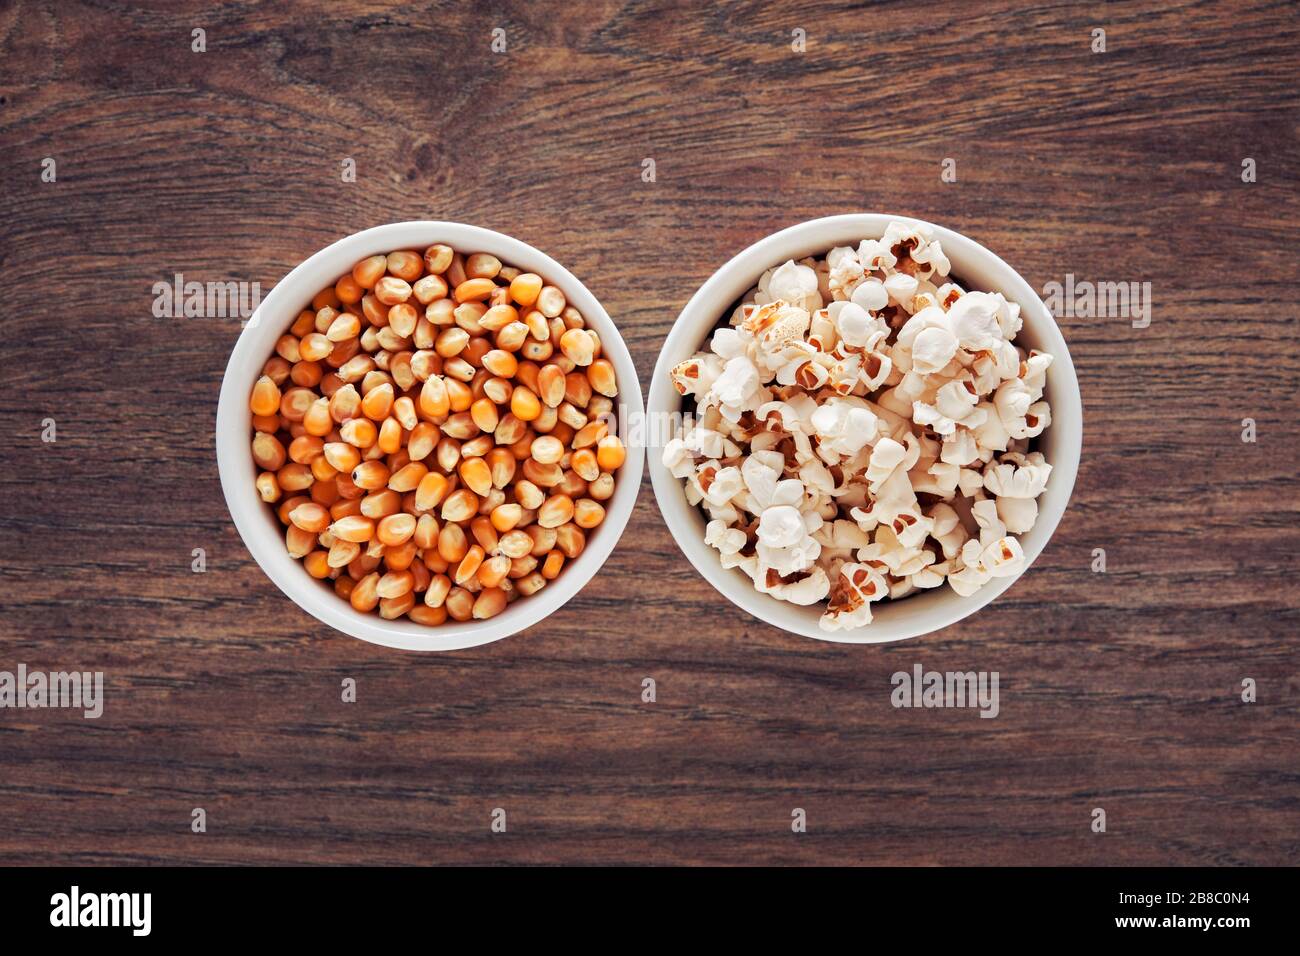 Two bowls filled with popcorn and corn maize or kernel seed. Popcorn preparation. Stock Photo